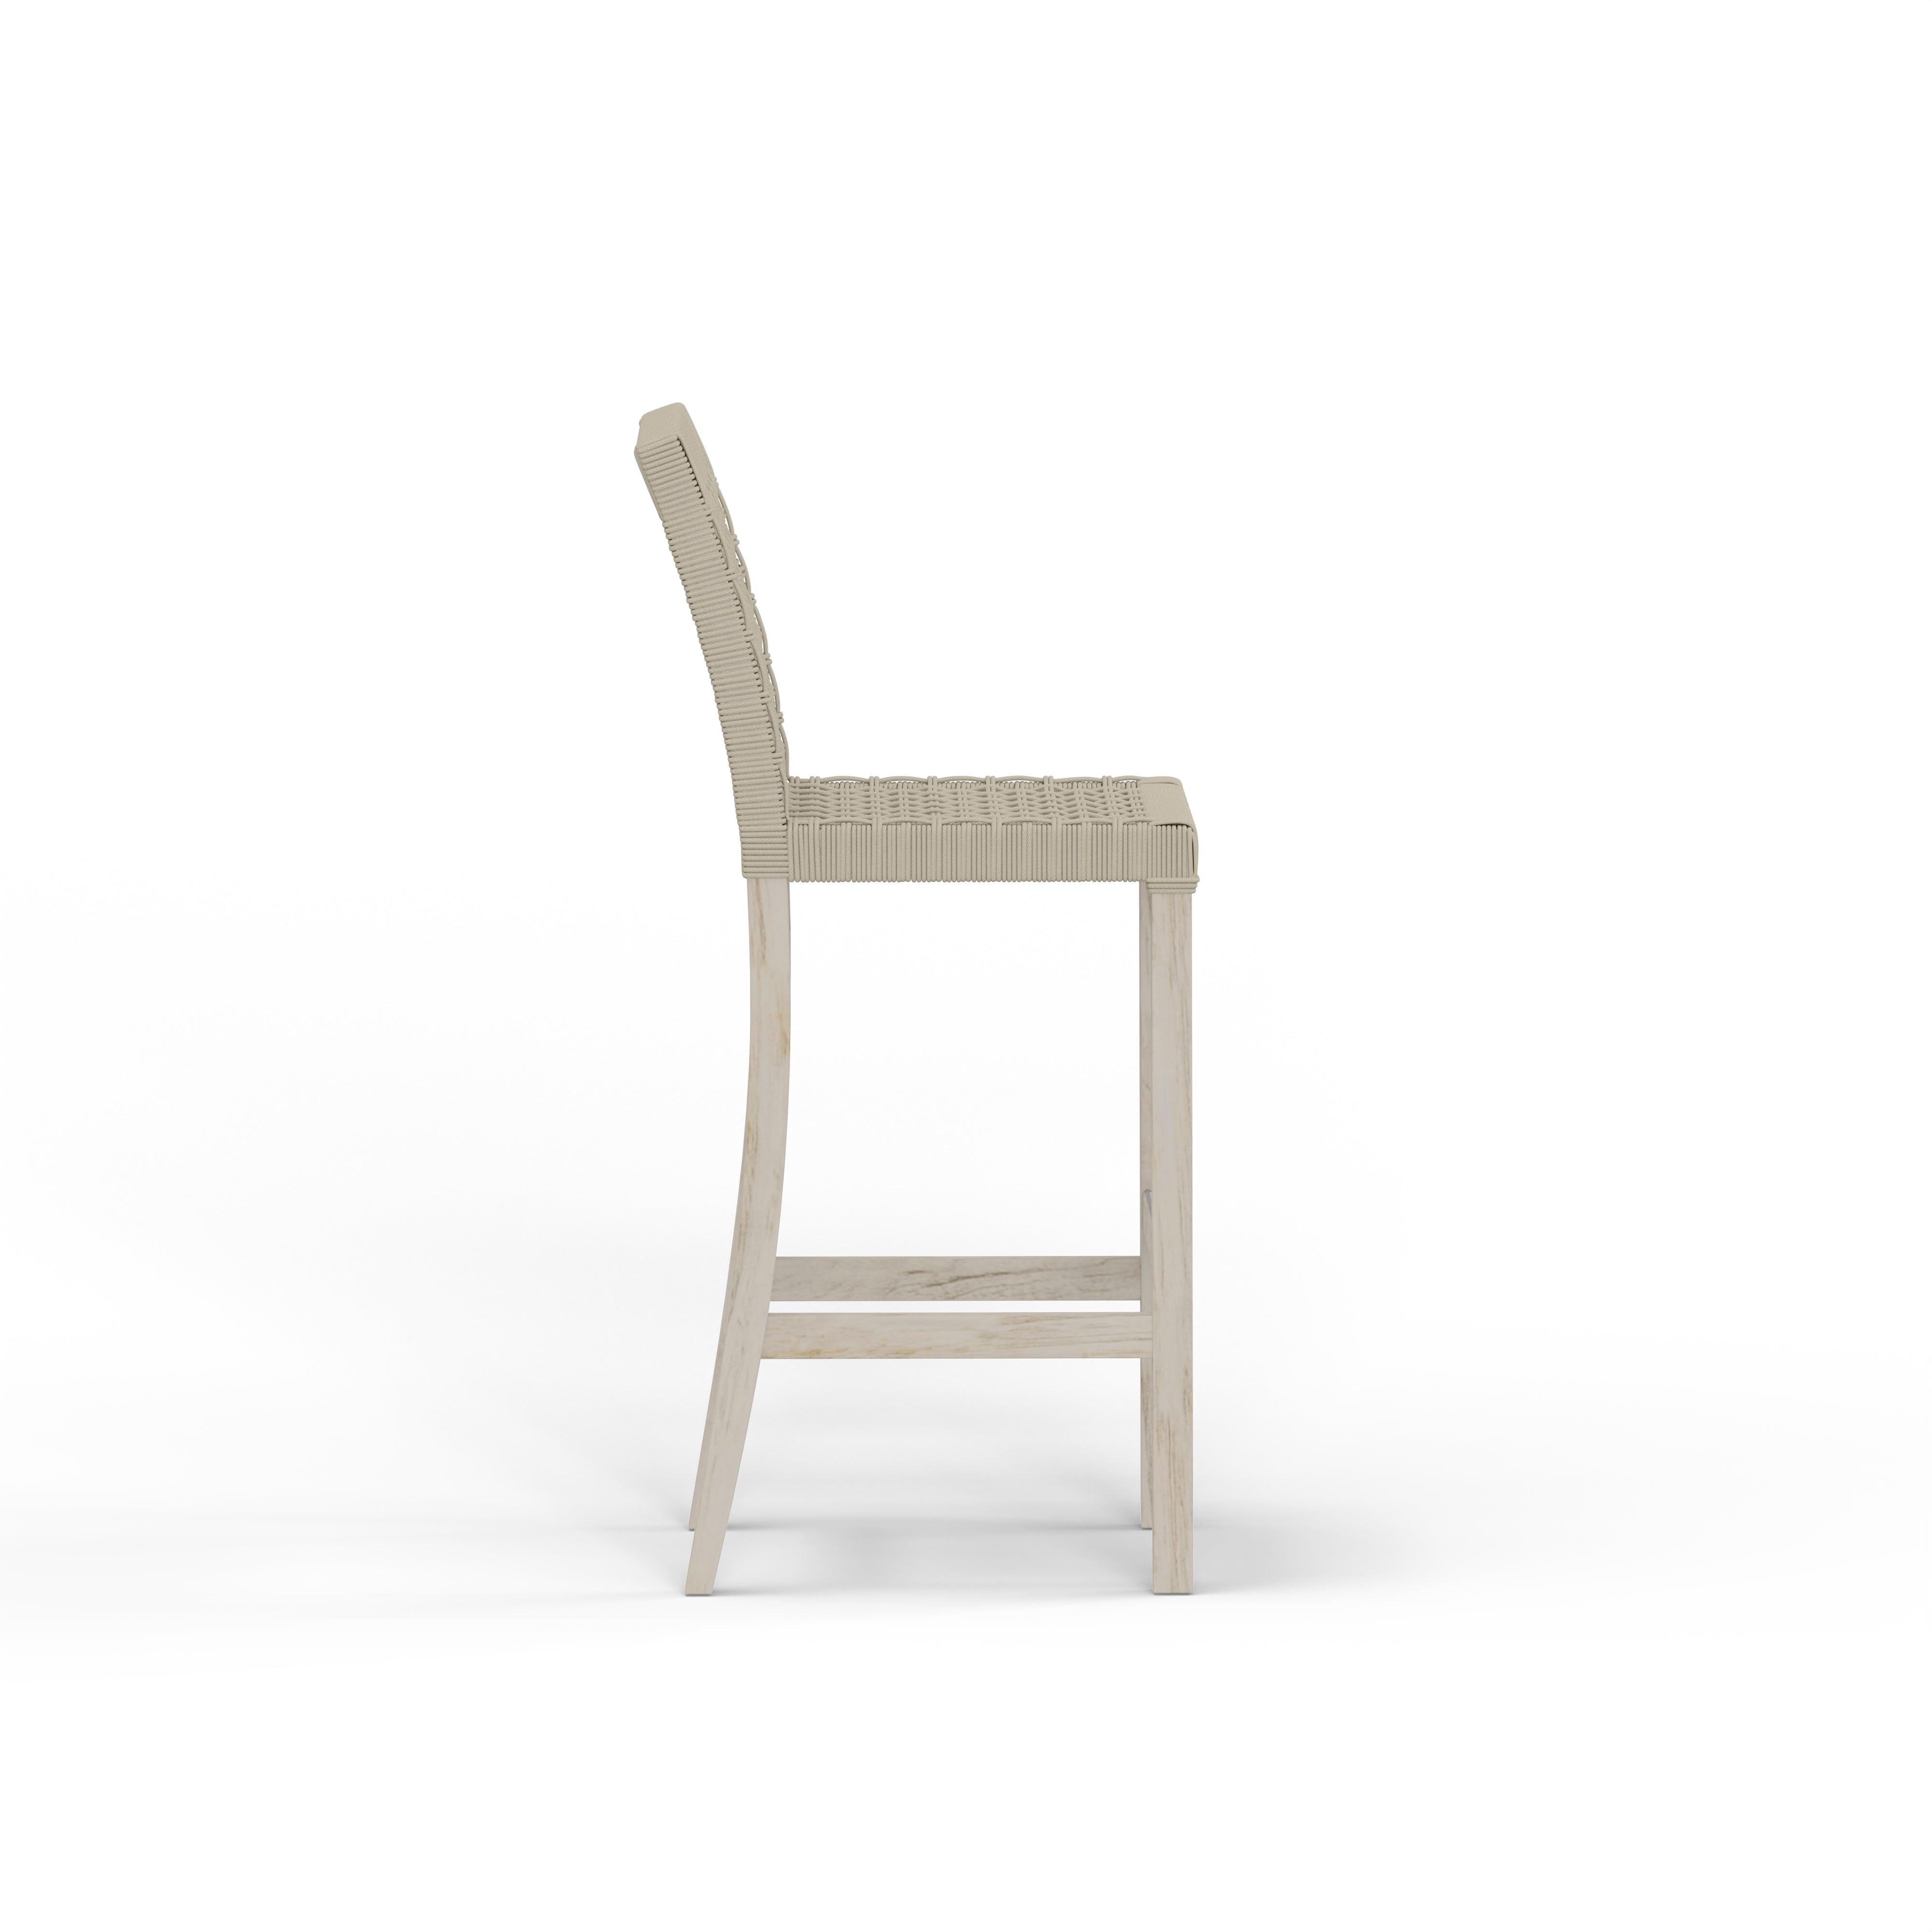 Nicest Rope Bar Chair For Outdoors  Edit alt text